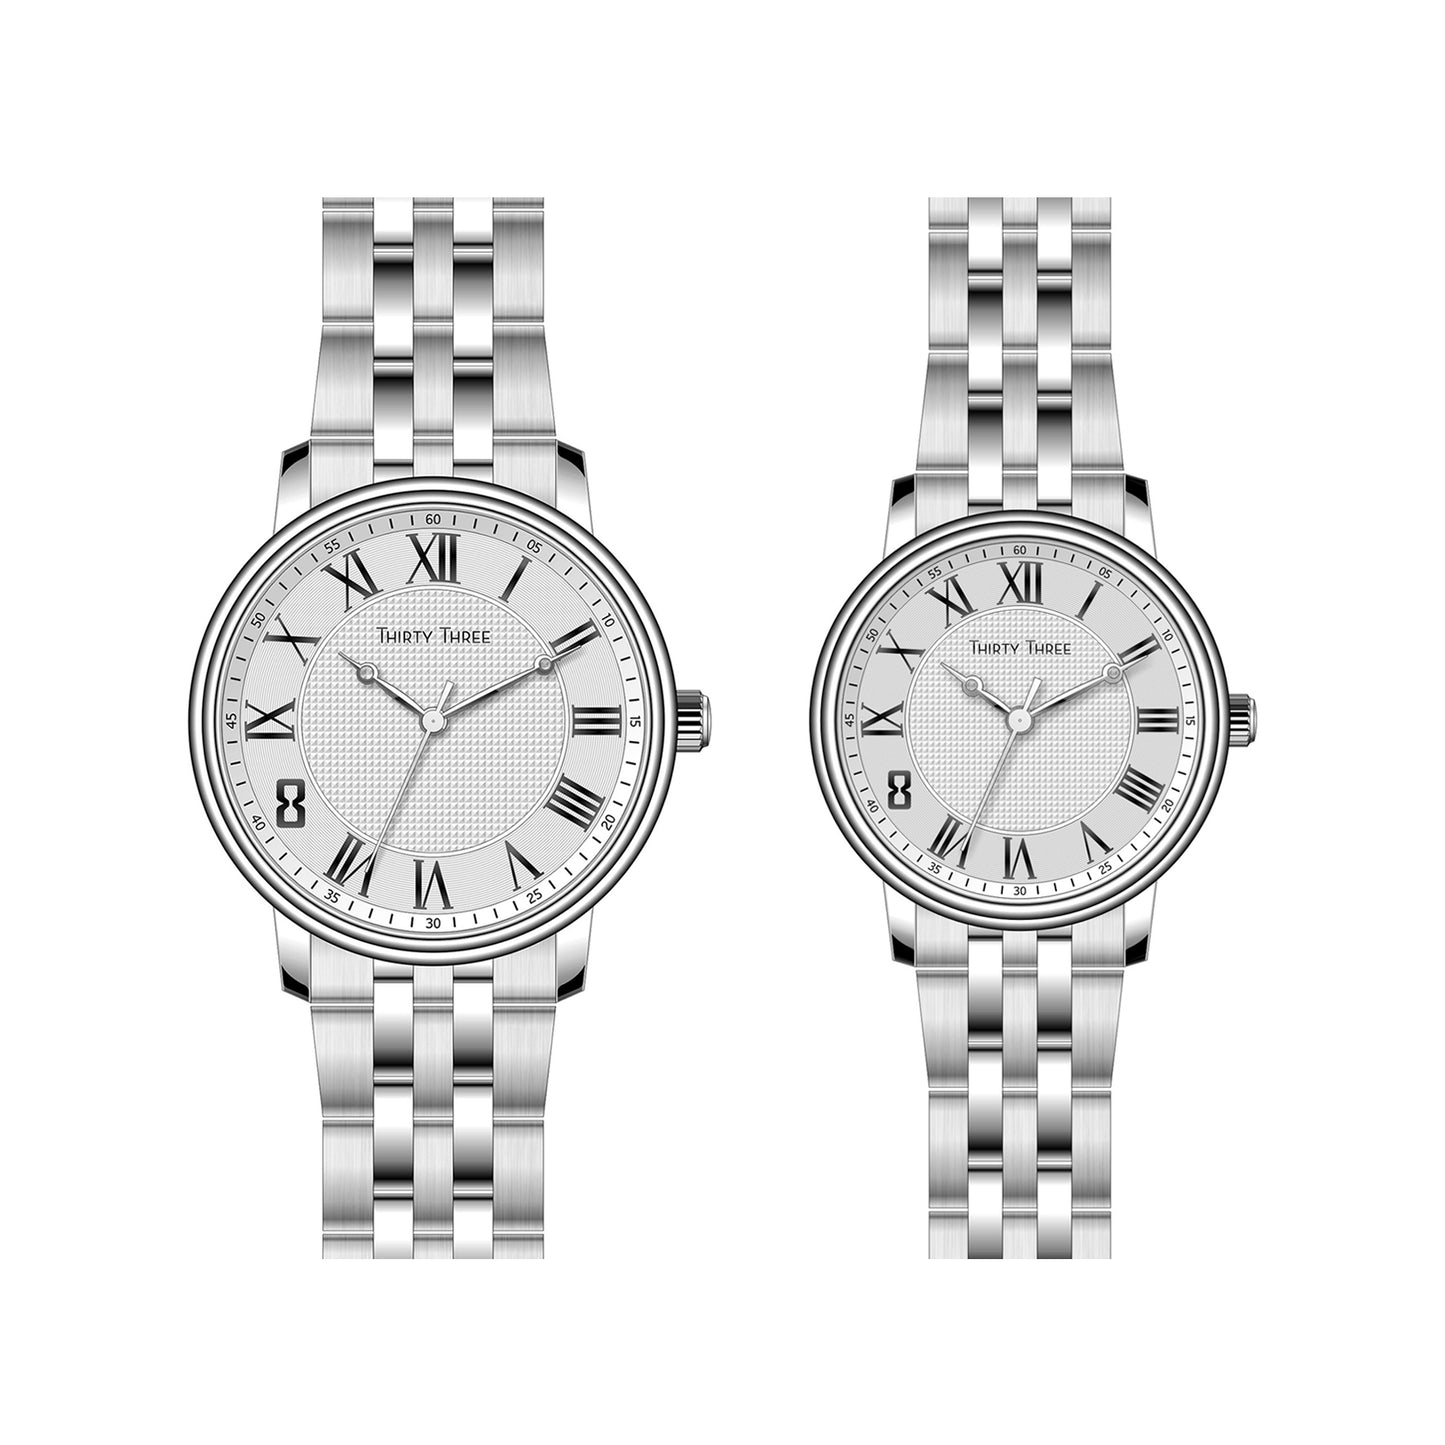 BUY 1 GET 1 JAM TANGAN Couple watch - TH2007L-S01-S01/TH2007MS01-S01